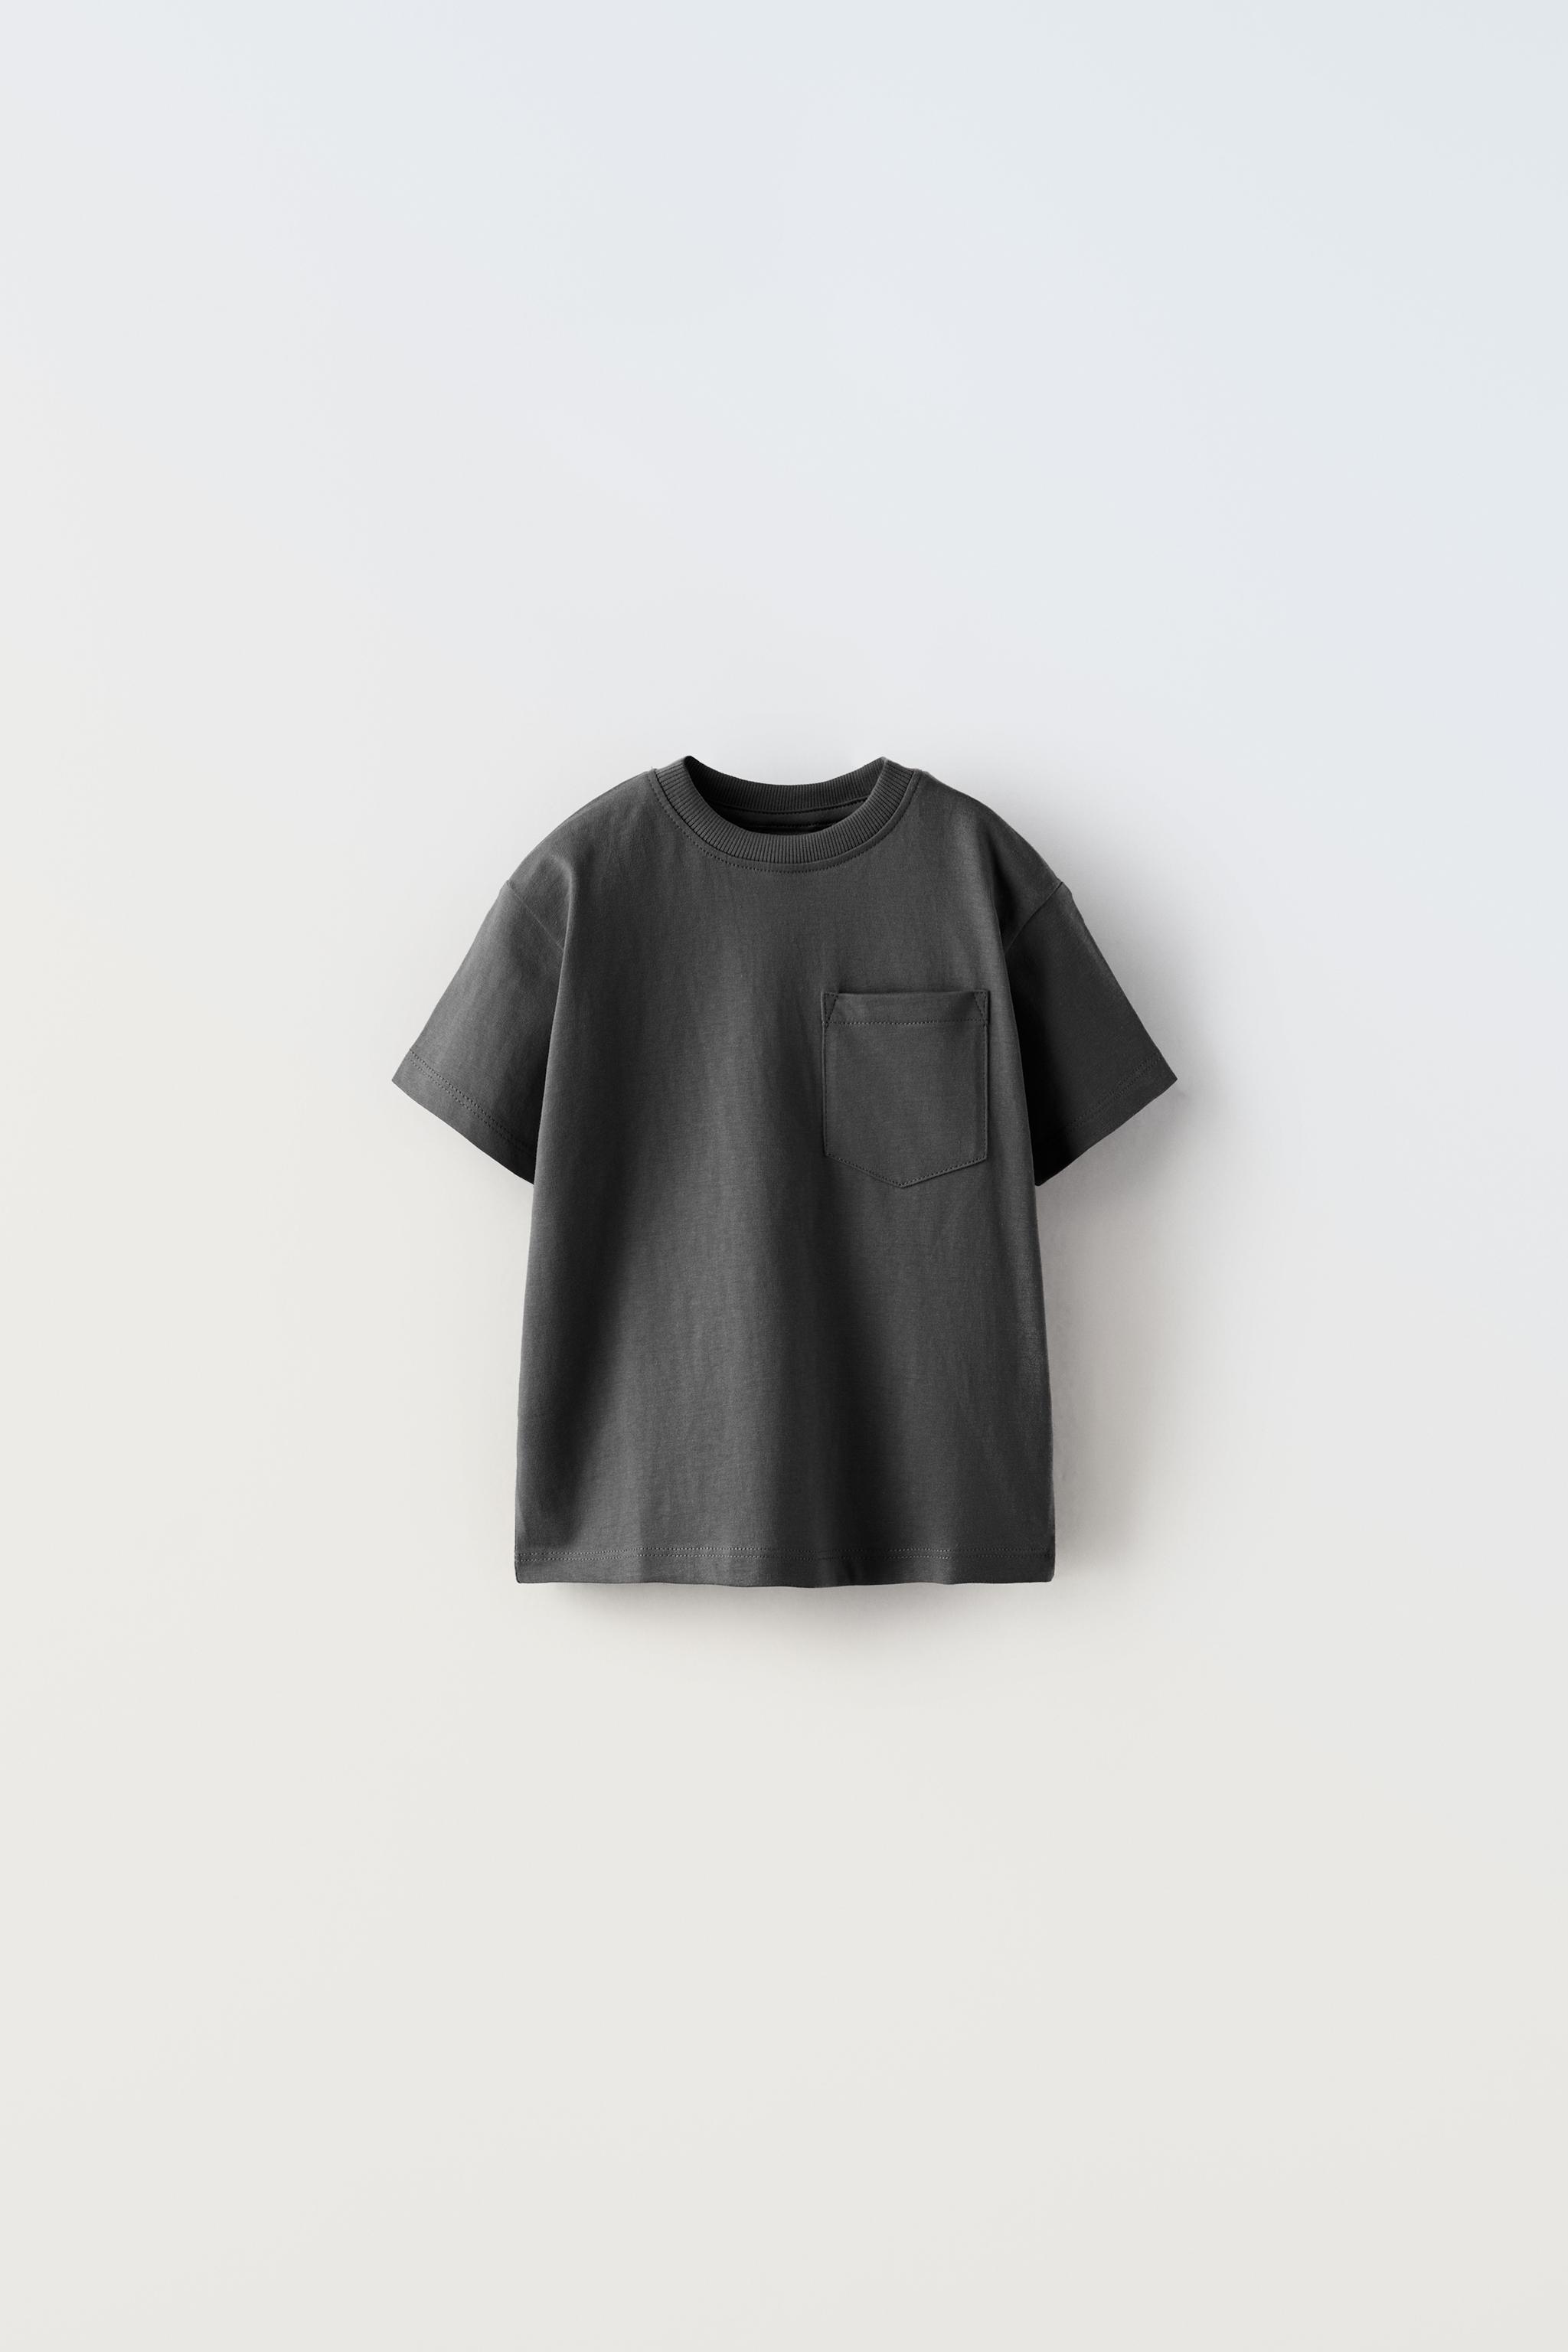 View All T-shirts 1½ - 6 Years